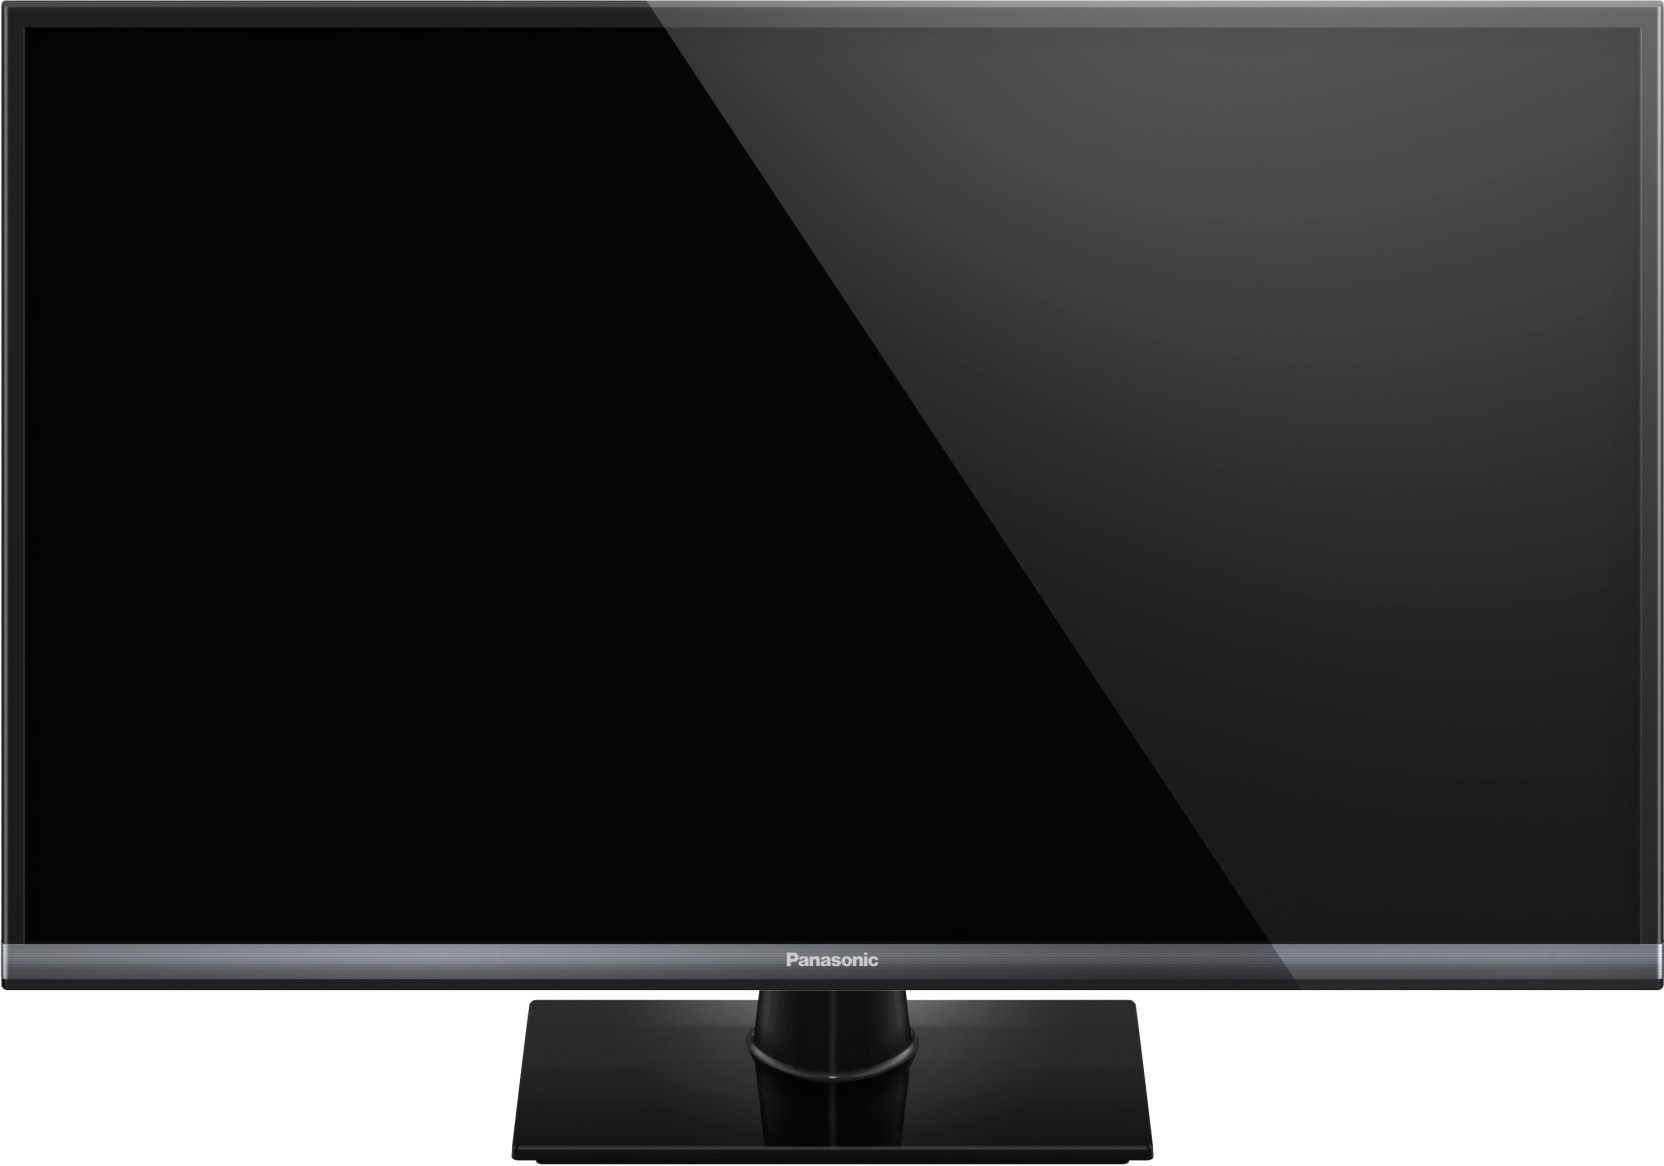 Panasonic 80cm (32 inch) HD Ready LED Smart TV Online at best Prices In